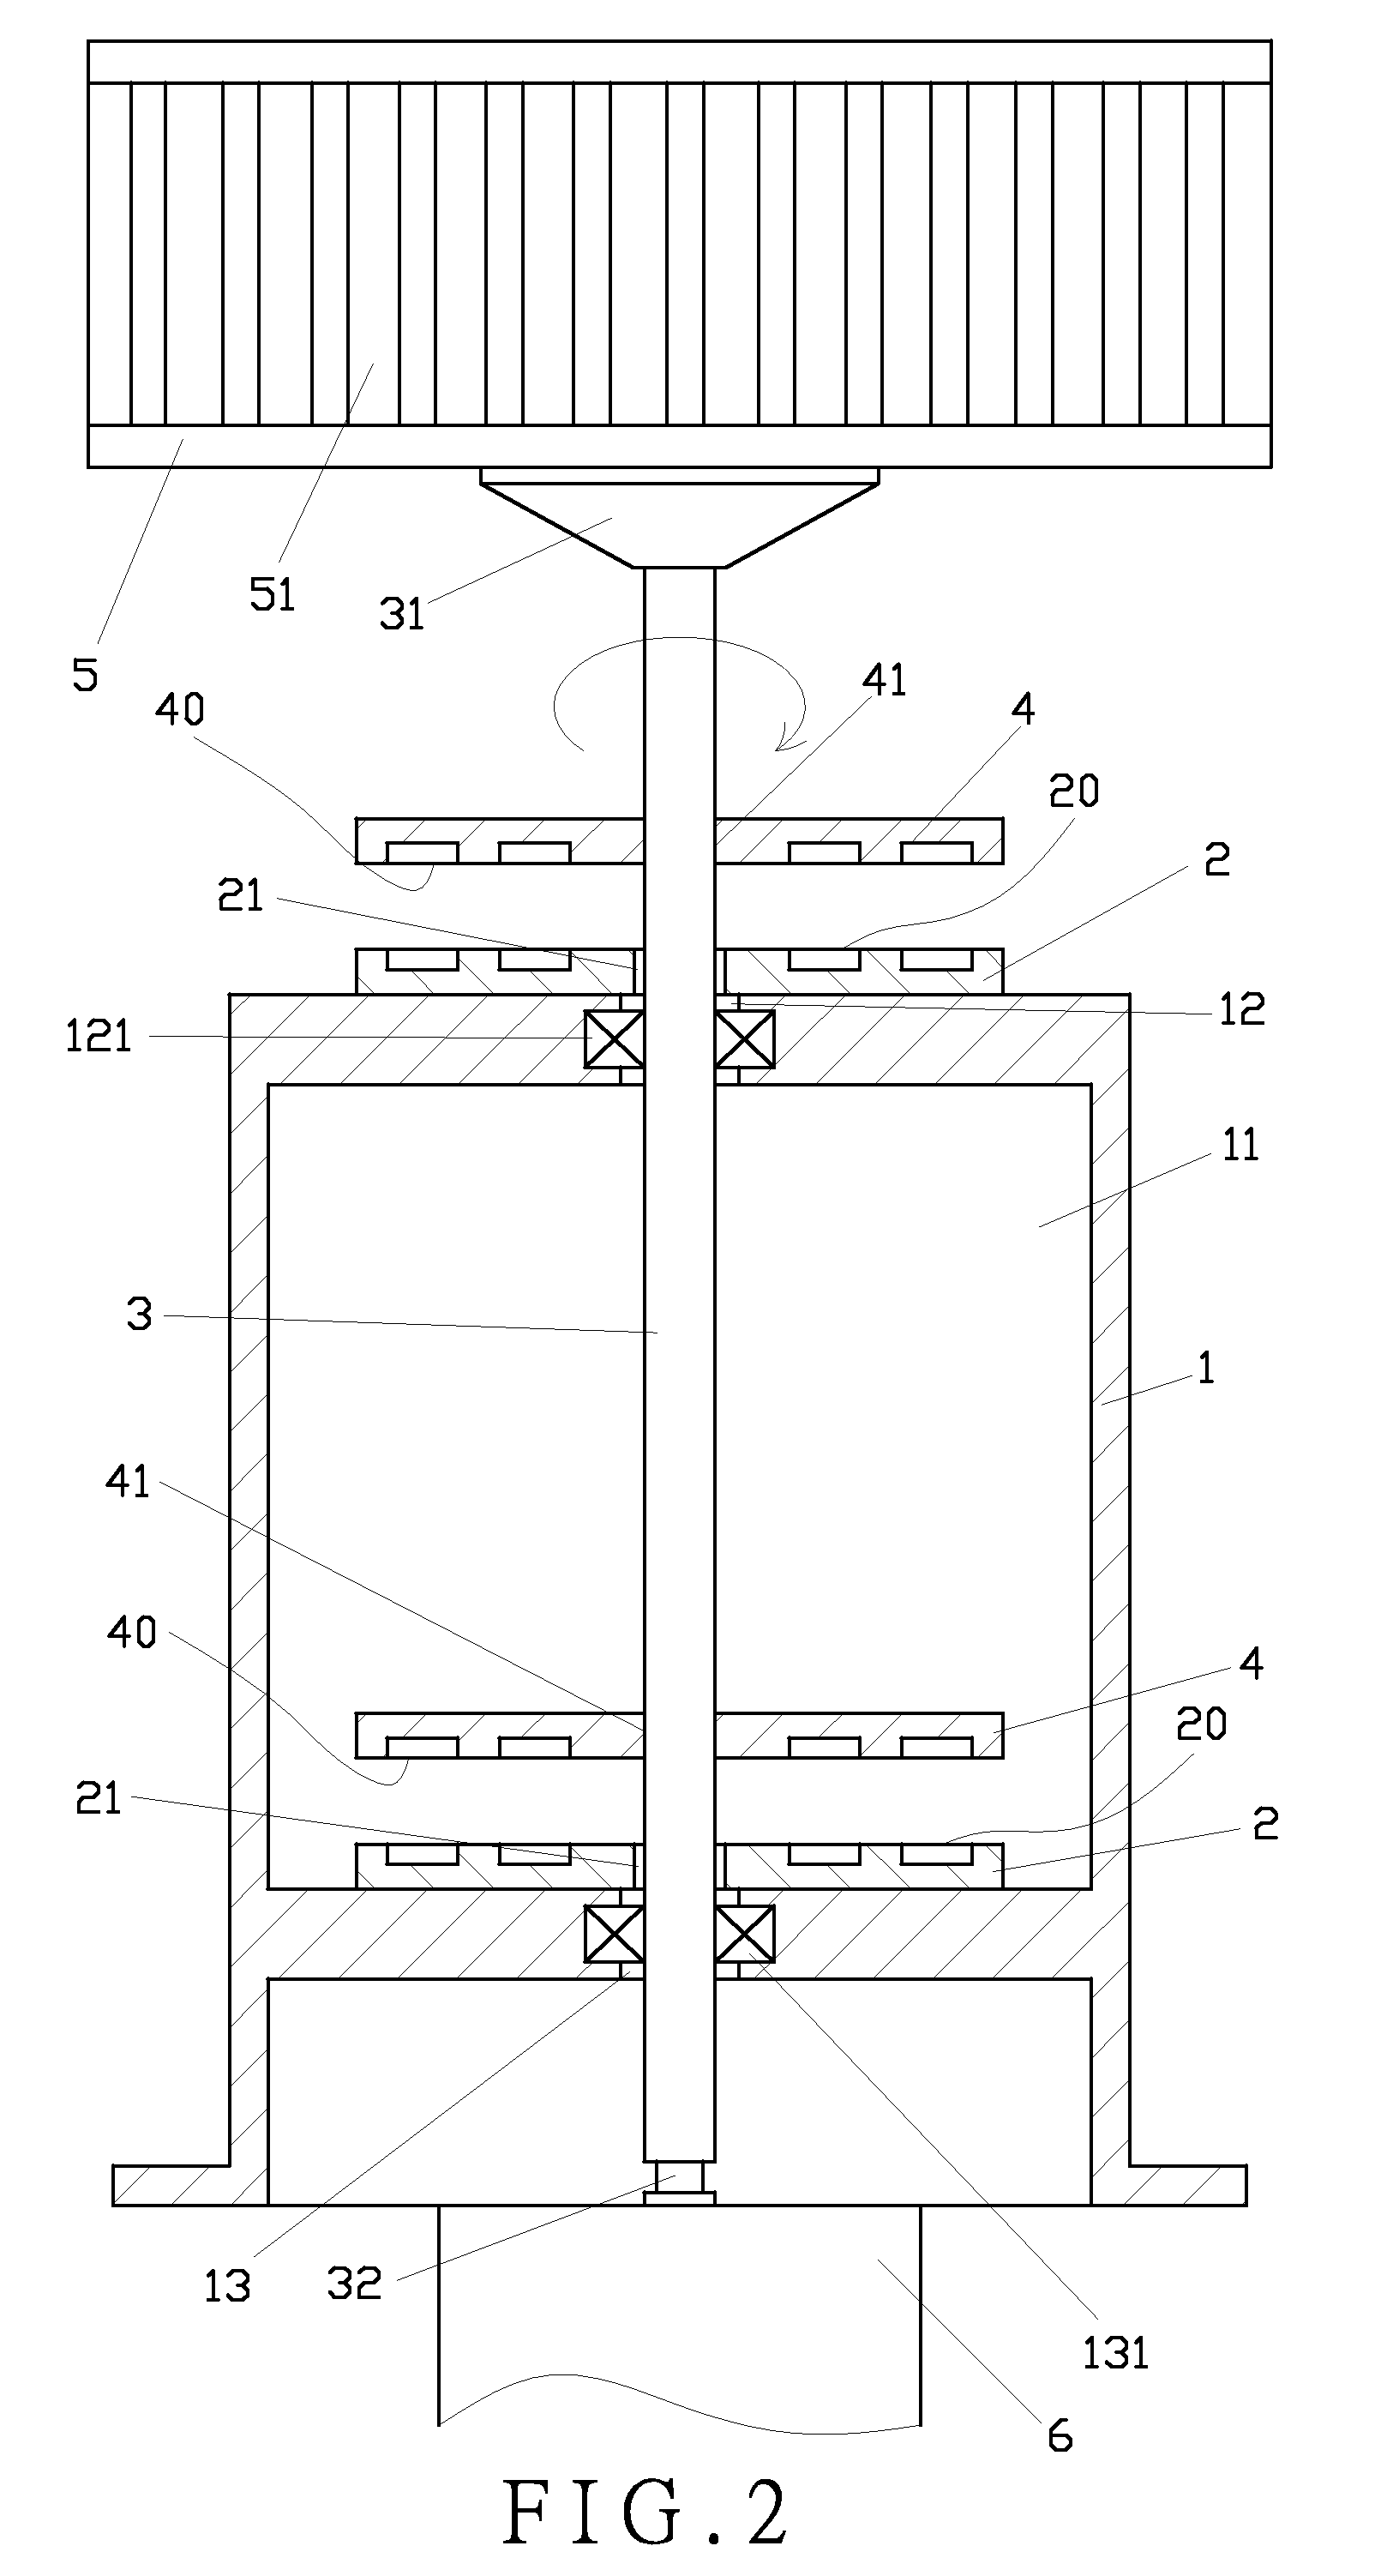 Magnetic levitation weight reduction structure for a vertical wind turbine generator